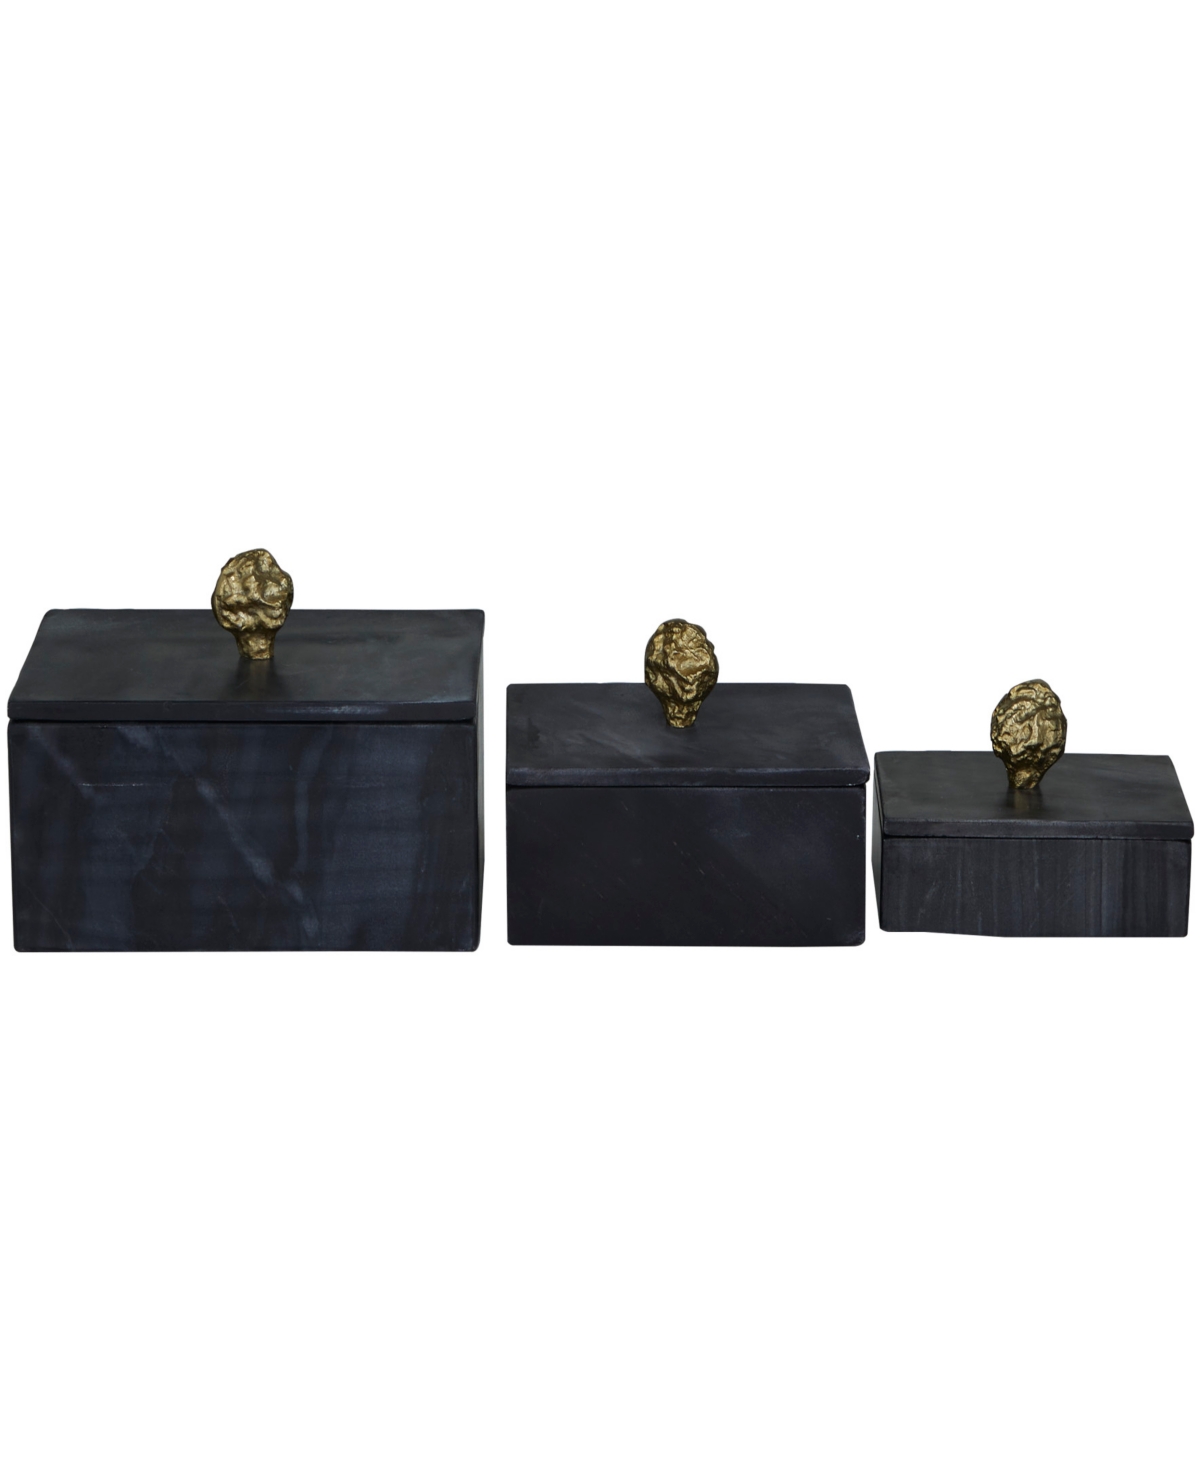 ROSEMARY LANE REAL MARBLE BOX WITH GOLD-TONE FINIAL SET OF 3